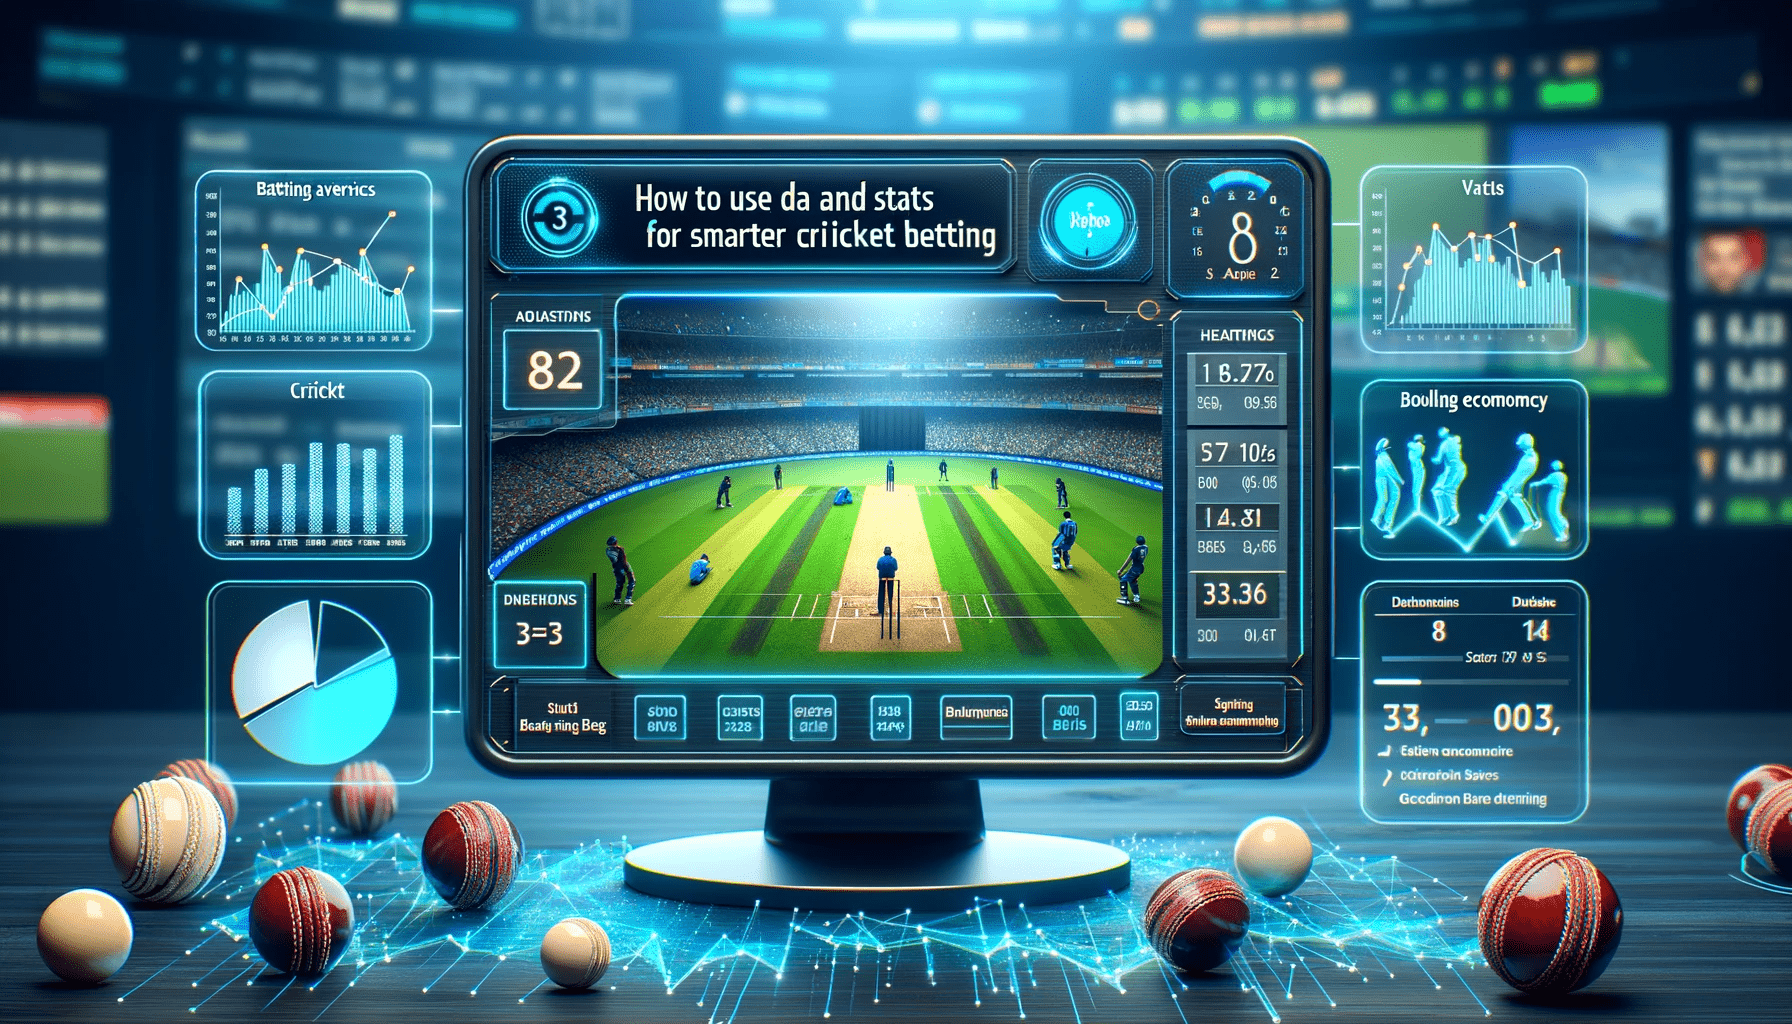 How to Use Data and Stats for Smarter Cricket Betting